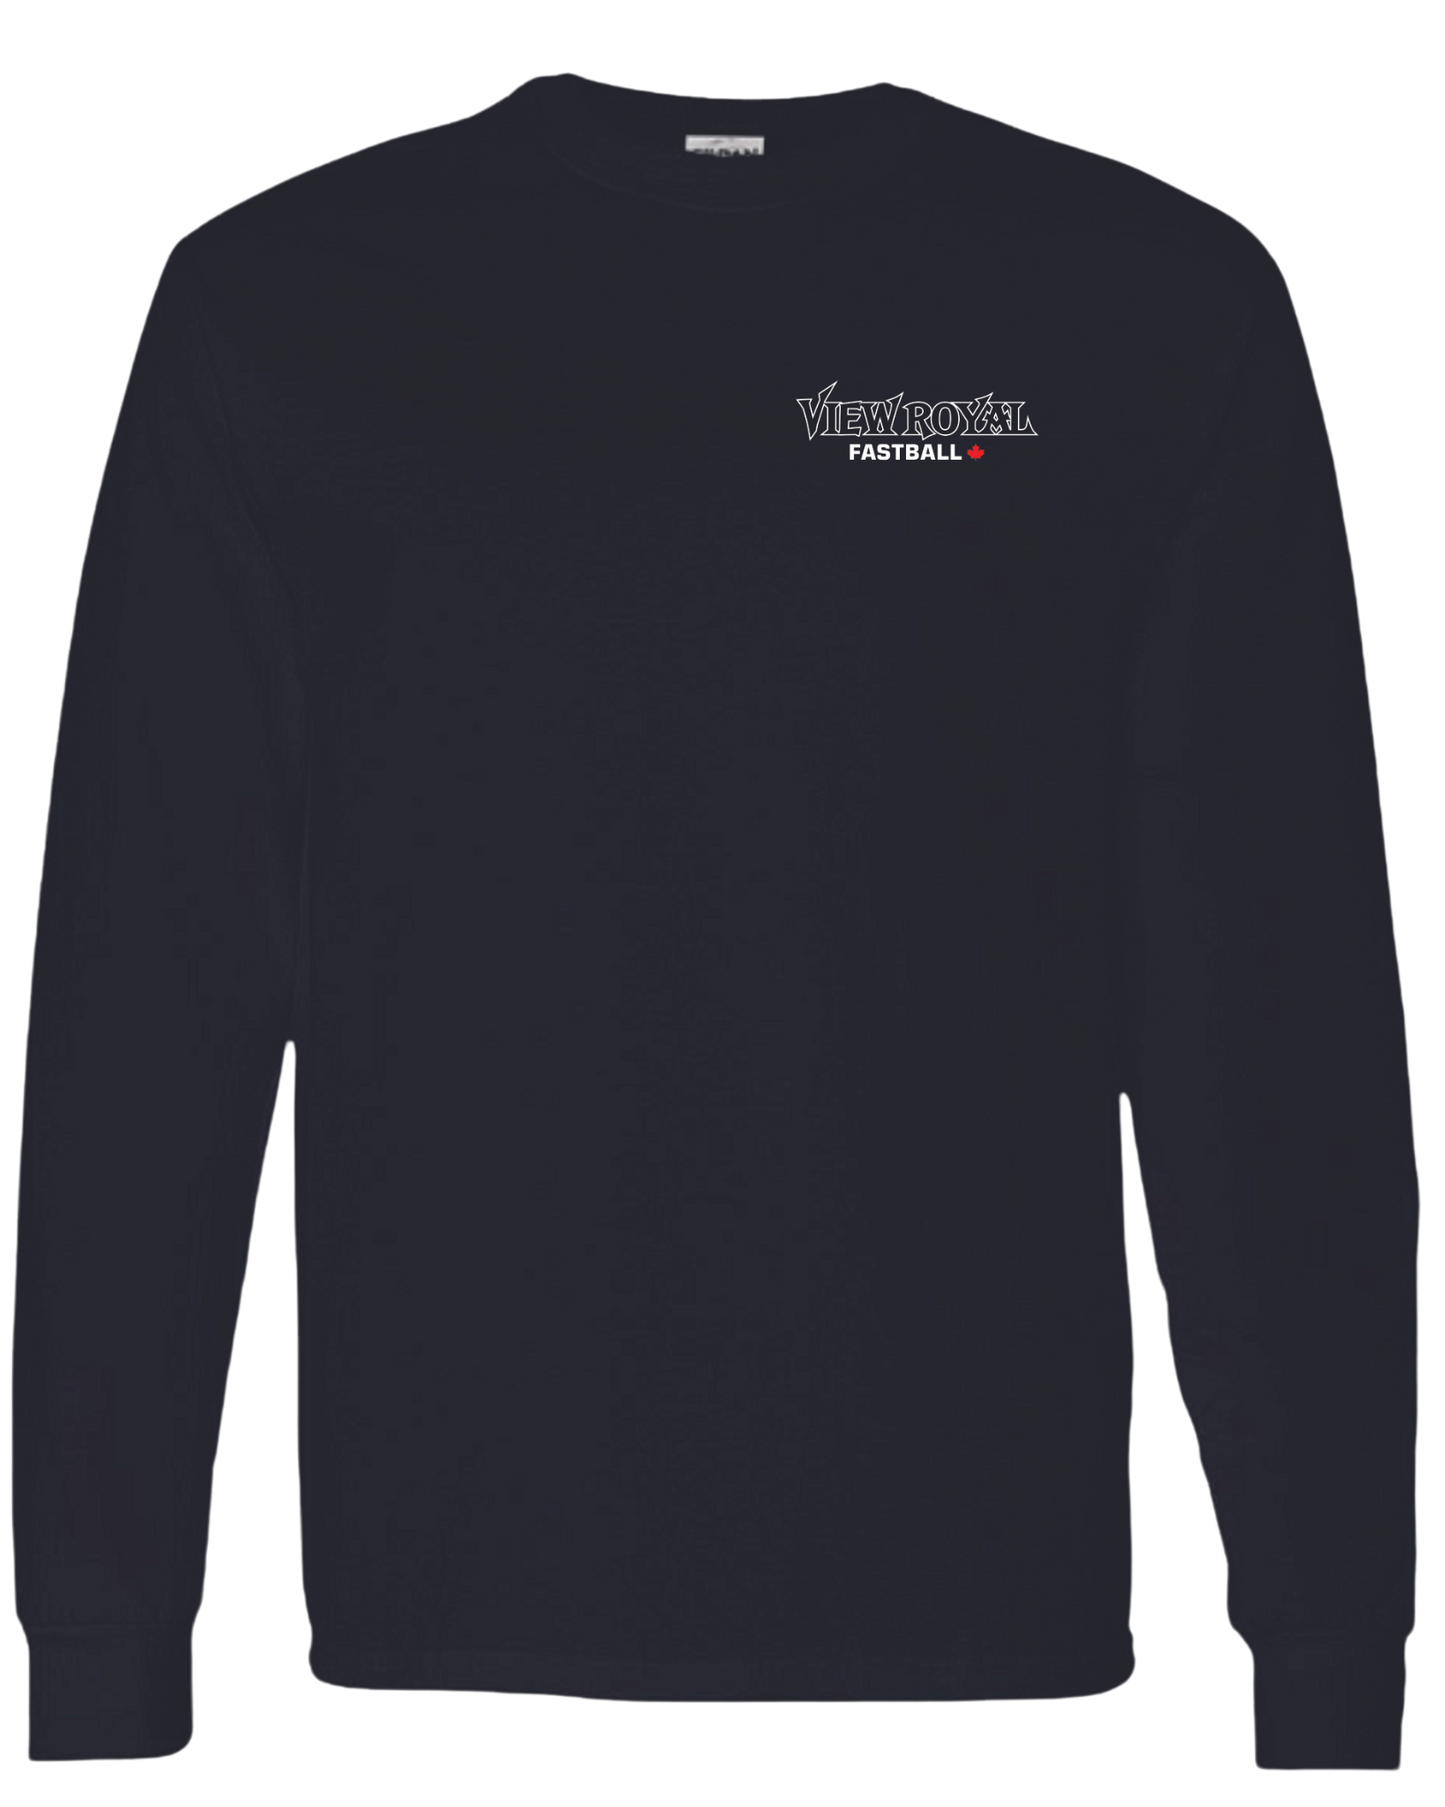 View Royal Fastball Unisex and Youth Cotton Long Sleeve Tshirts